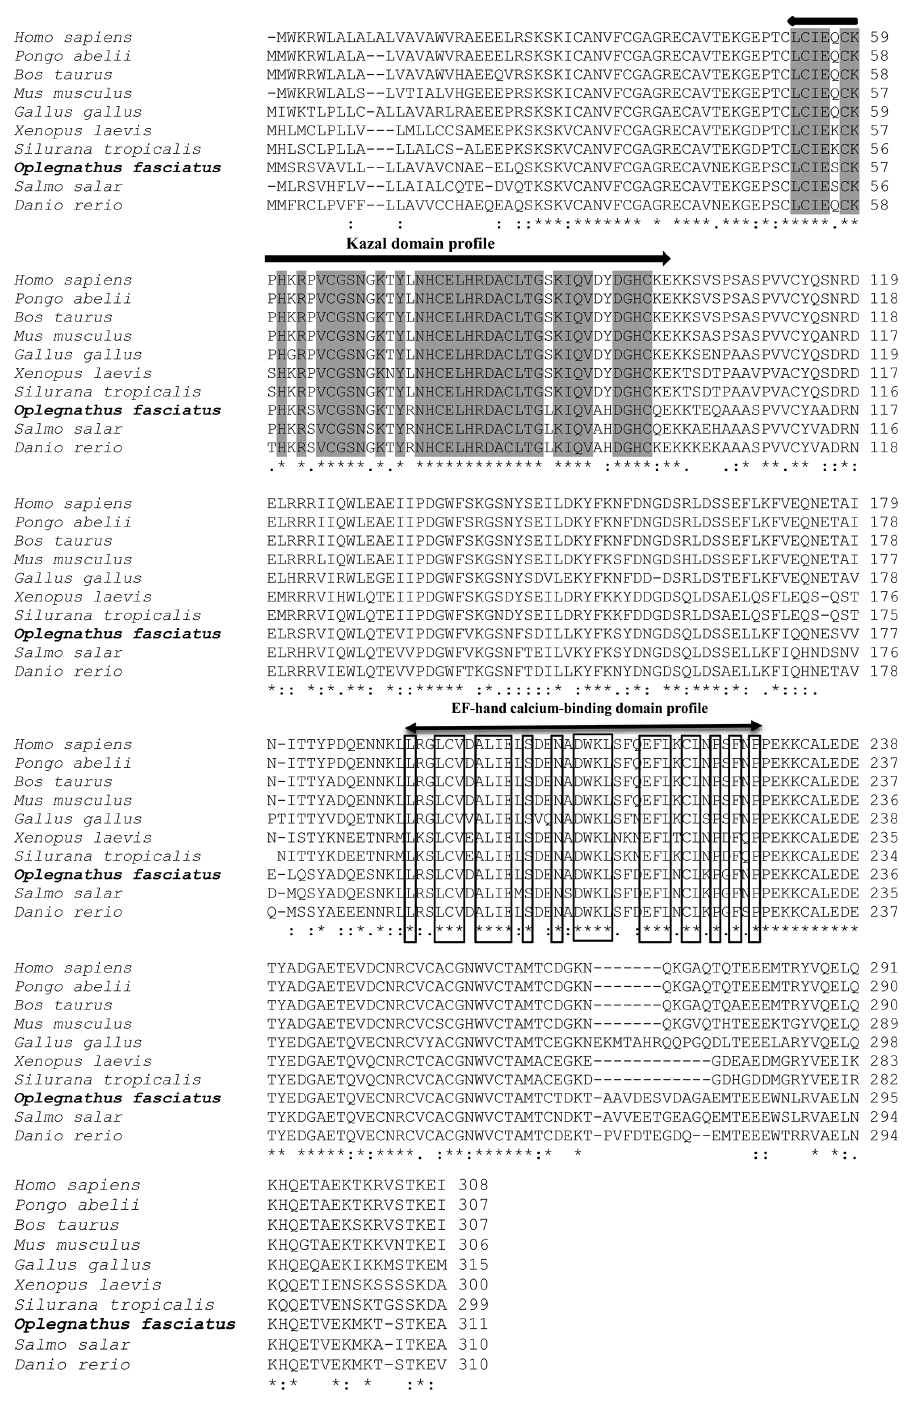 Clustal W multiple sequence alignment of the deduced amino acid sequence of RbFST in present study with known FSTs. The identical residues are indicated by asterisk (*) and semi conserved residues are indicated by semicolon (:) and dots (.). Kazal domain profile is indicated by thick double headed arrow and highly conserved regions in the domain are shaded. The EF-hand calcium-binding domain profile is indicated with thin double headed arrows and highly conserved residues are boxed.